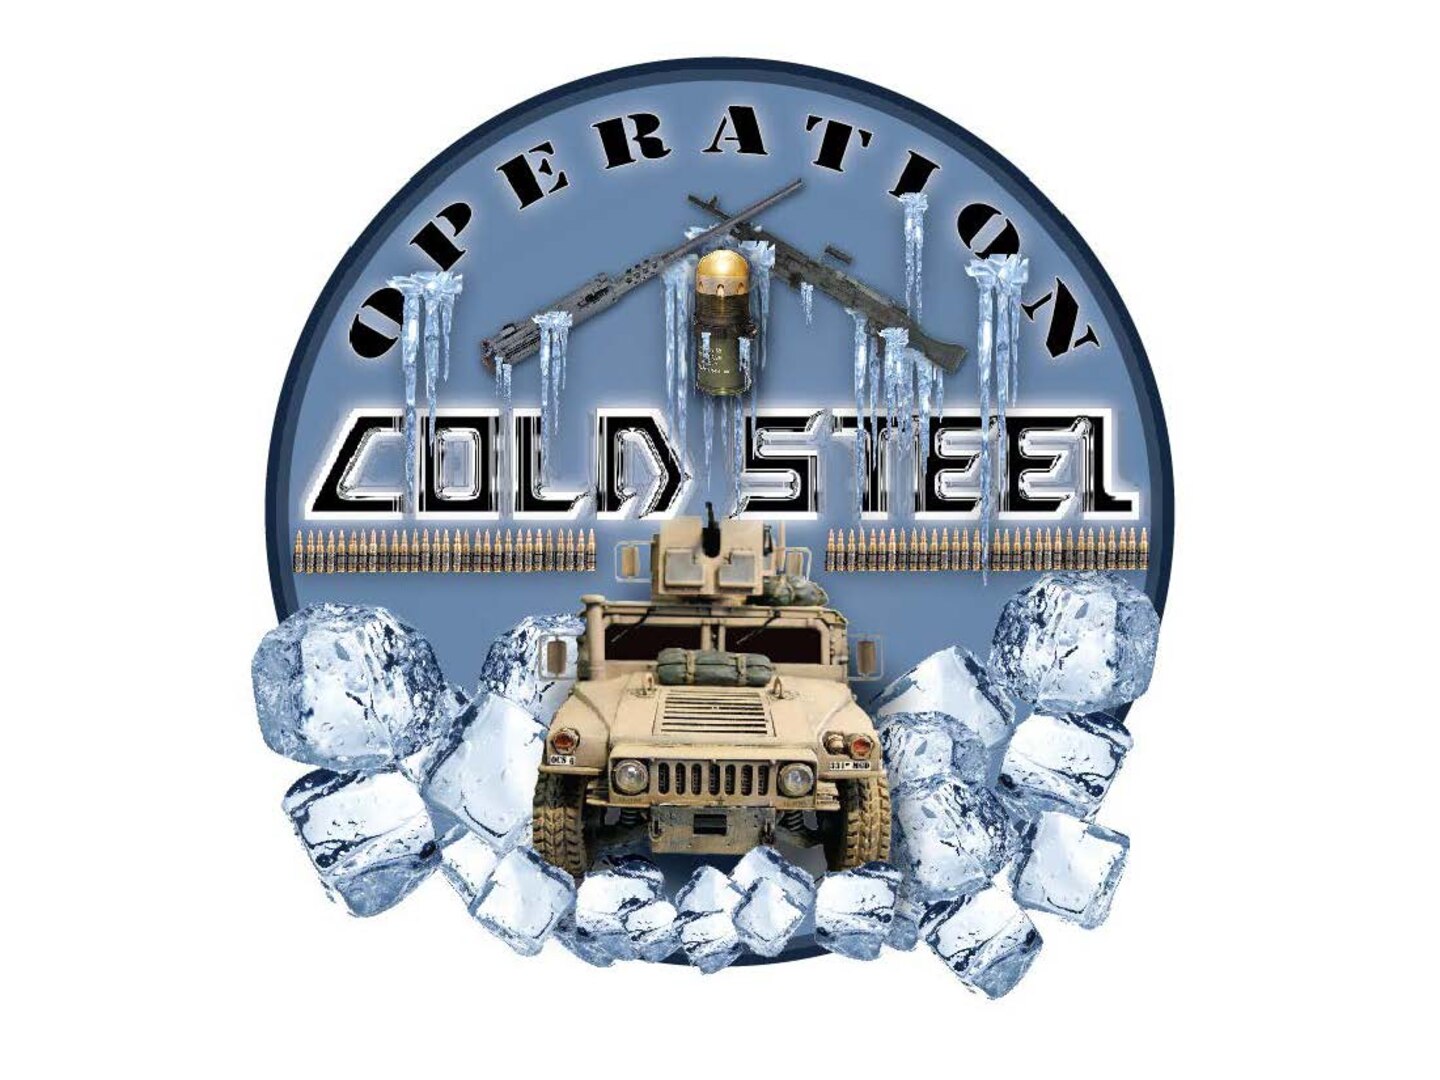 The official logo shows the actual weapons and vehicle used in the exercise, along with references to the participating Army Reserve units.